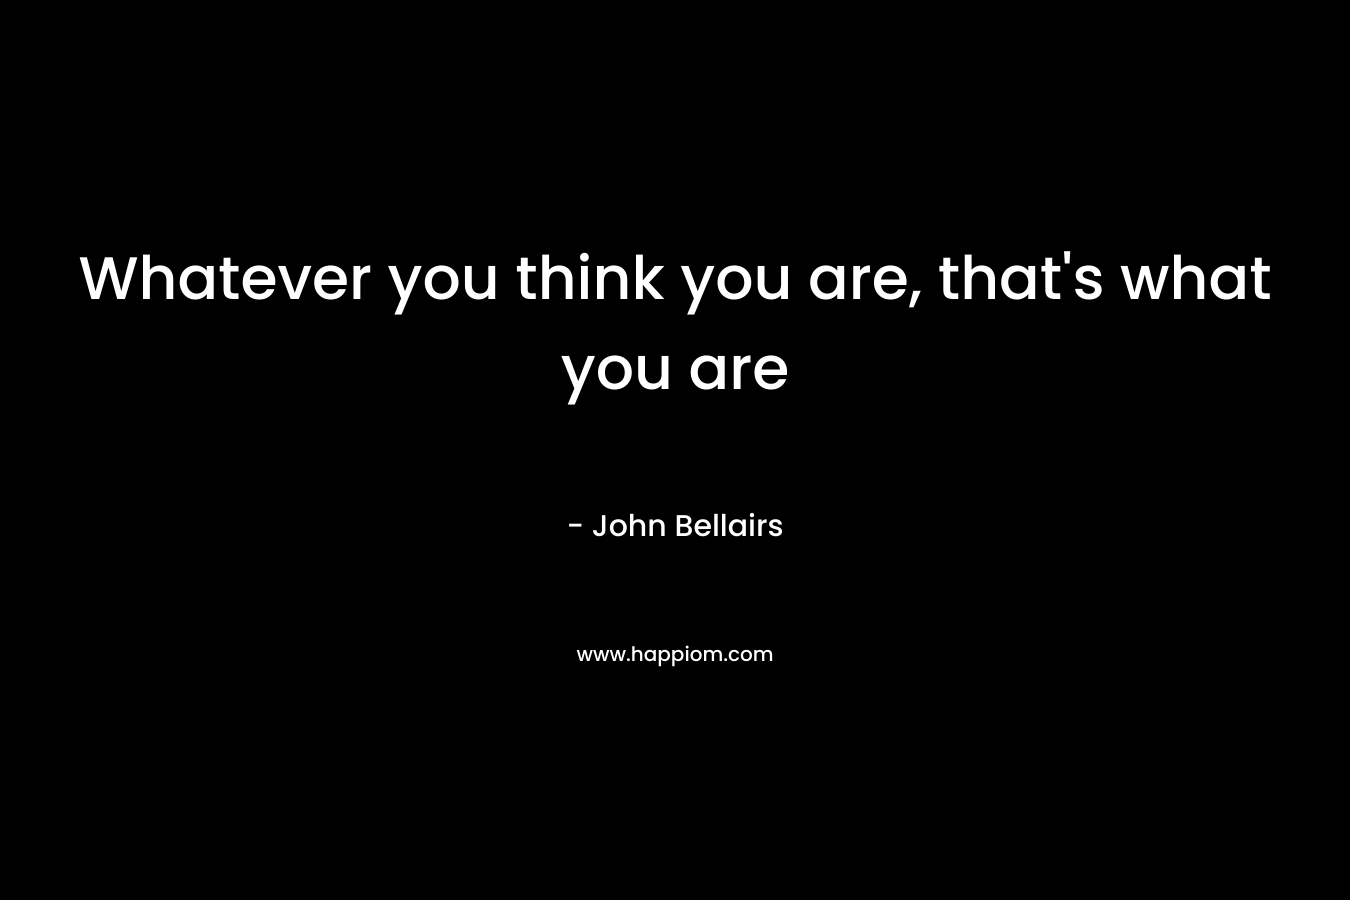 Whatever you think you are, that’s what you are – John Bellairs